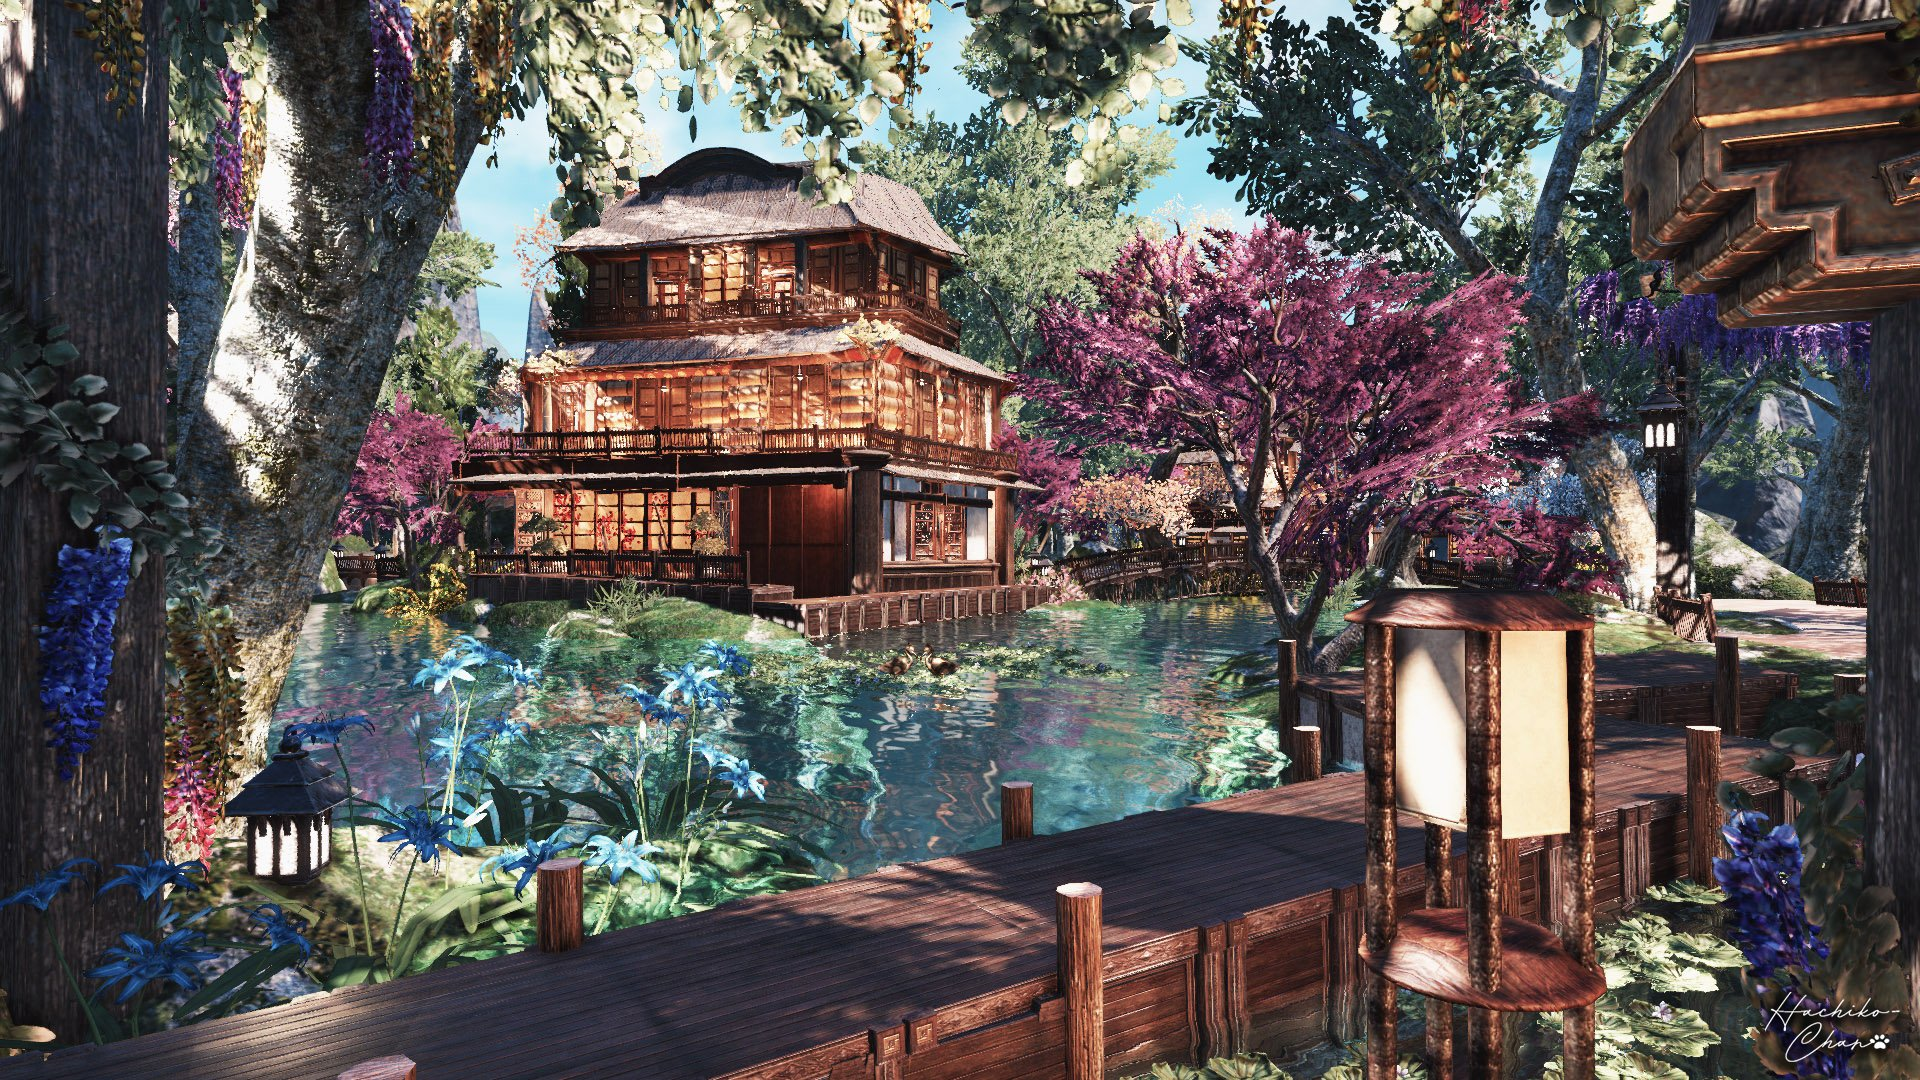 An image of a beautiful Japanese vista created by Hachiko Chan in The Elder Scrolls Online.